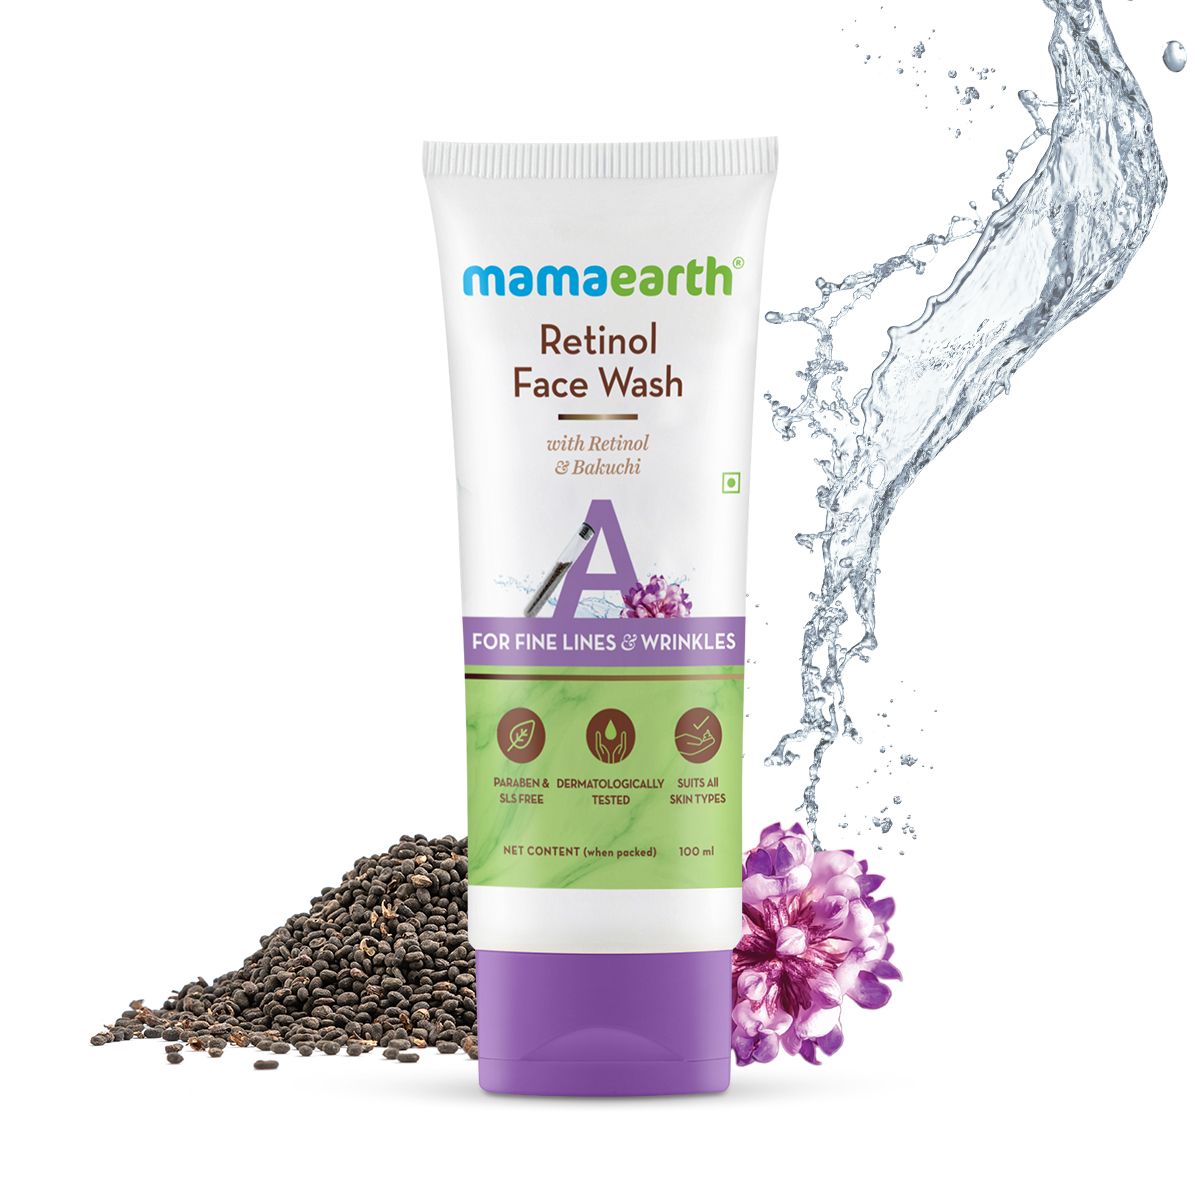 Why Is Mamaearth Retinol Face Wash Better Than Others Available in The Market